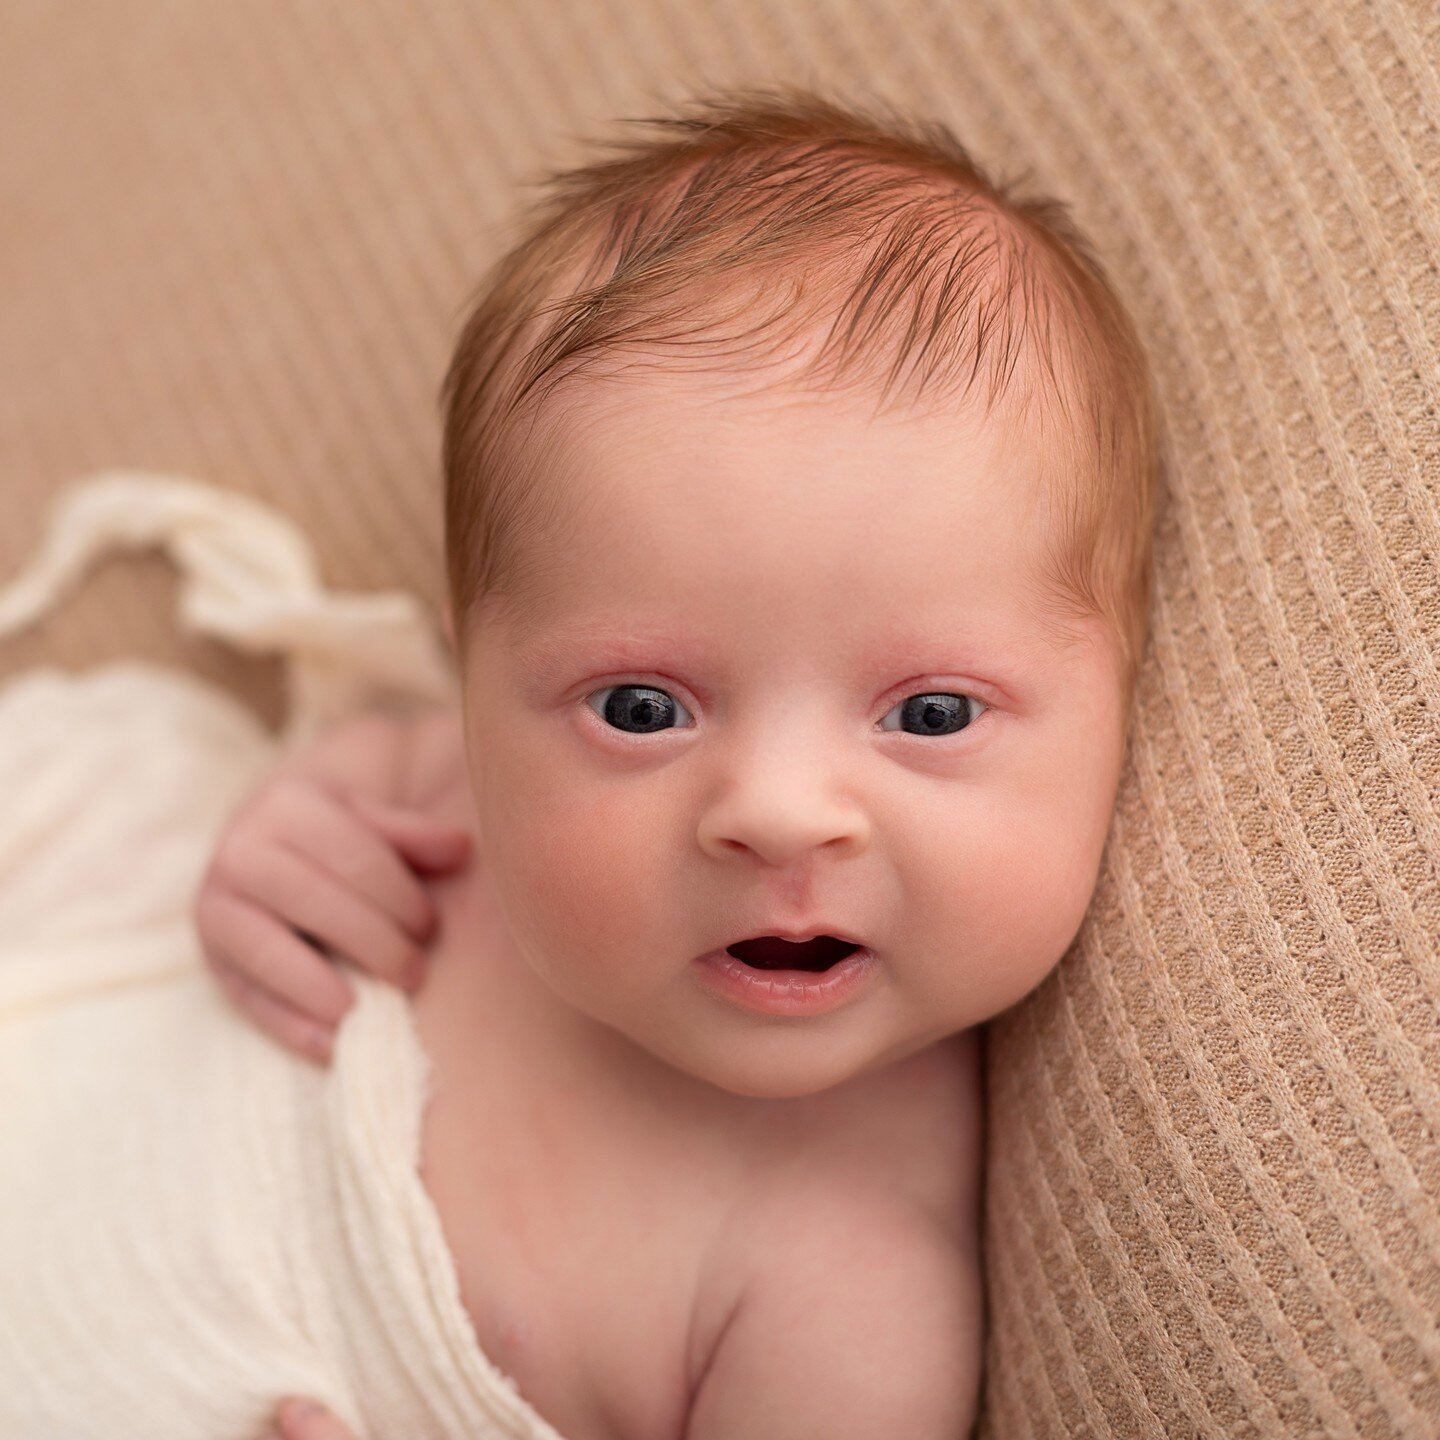 If you have ever had a newborn session with me you will know that a lot of the time during the session baby will be sleeping, But, I always tell my parents not to panic, baby is fine to have a little awake time during their session with me. Because l